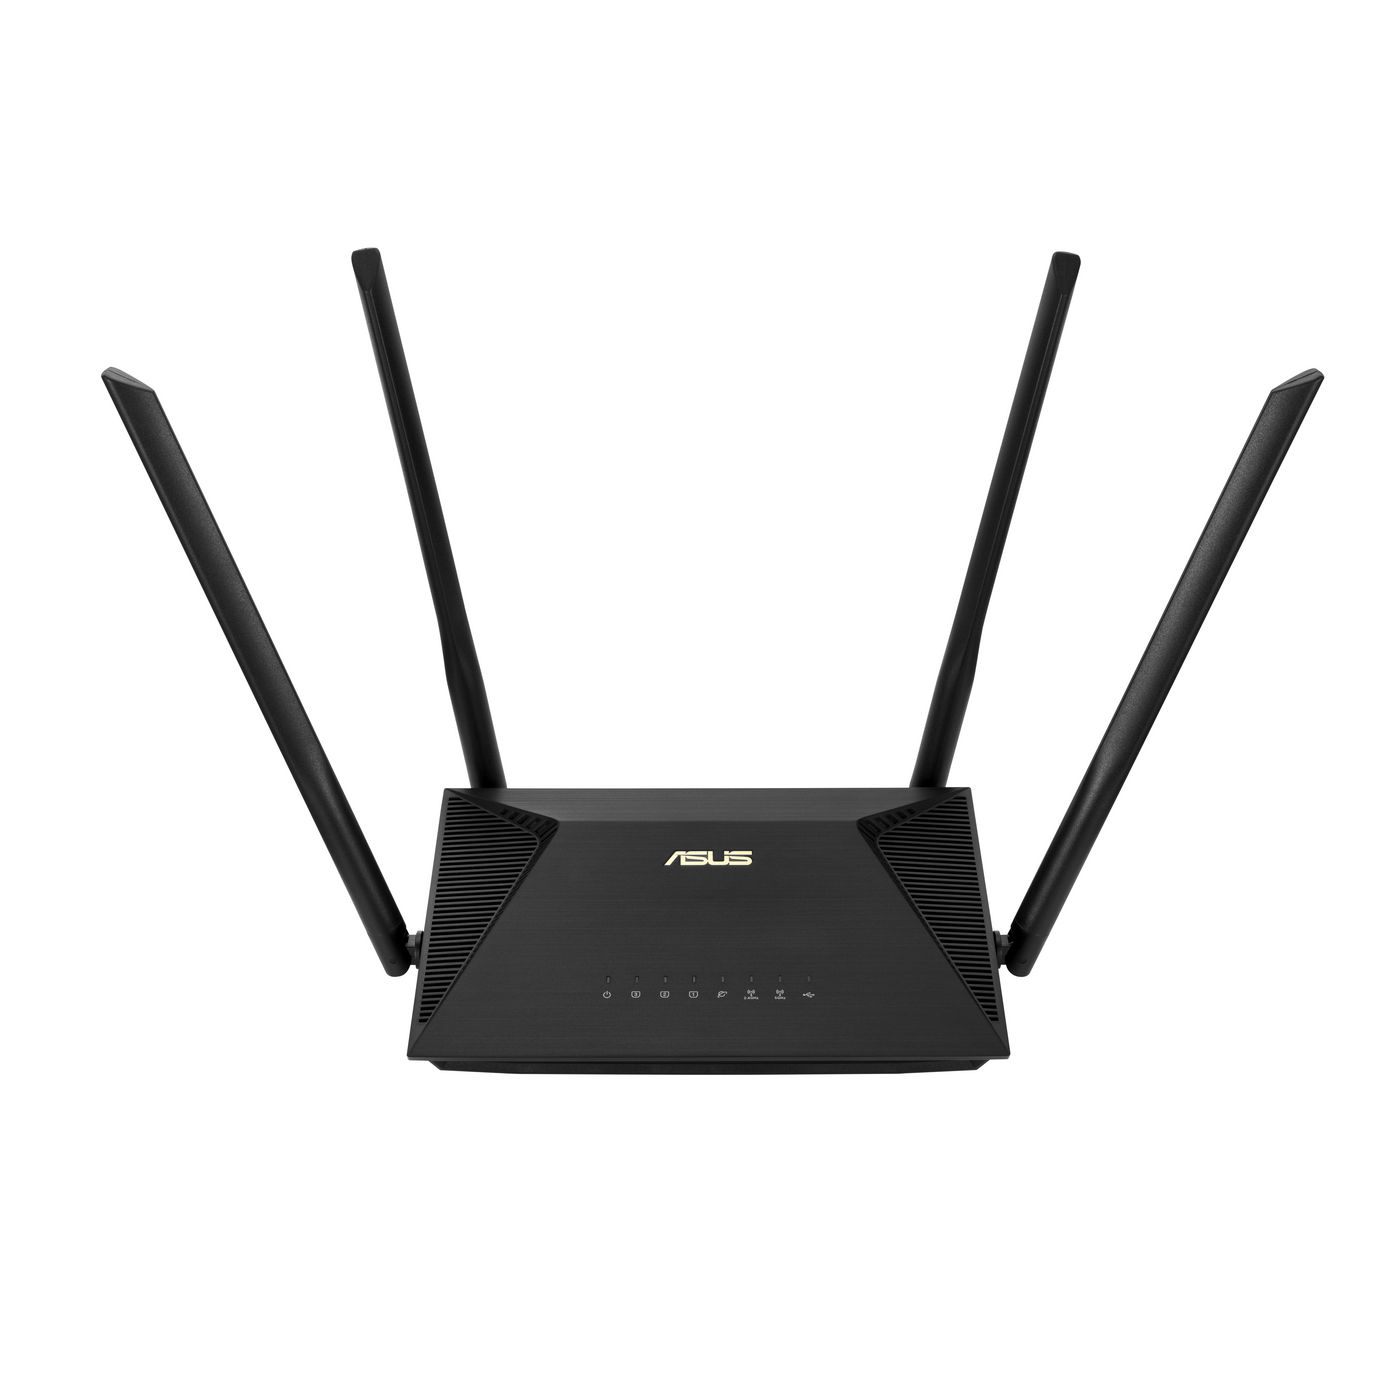 Asus 90IG06P0-MO3500 W128268764 Rt-Ax53U Wireless Router 